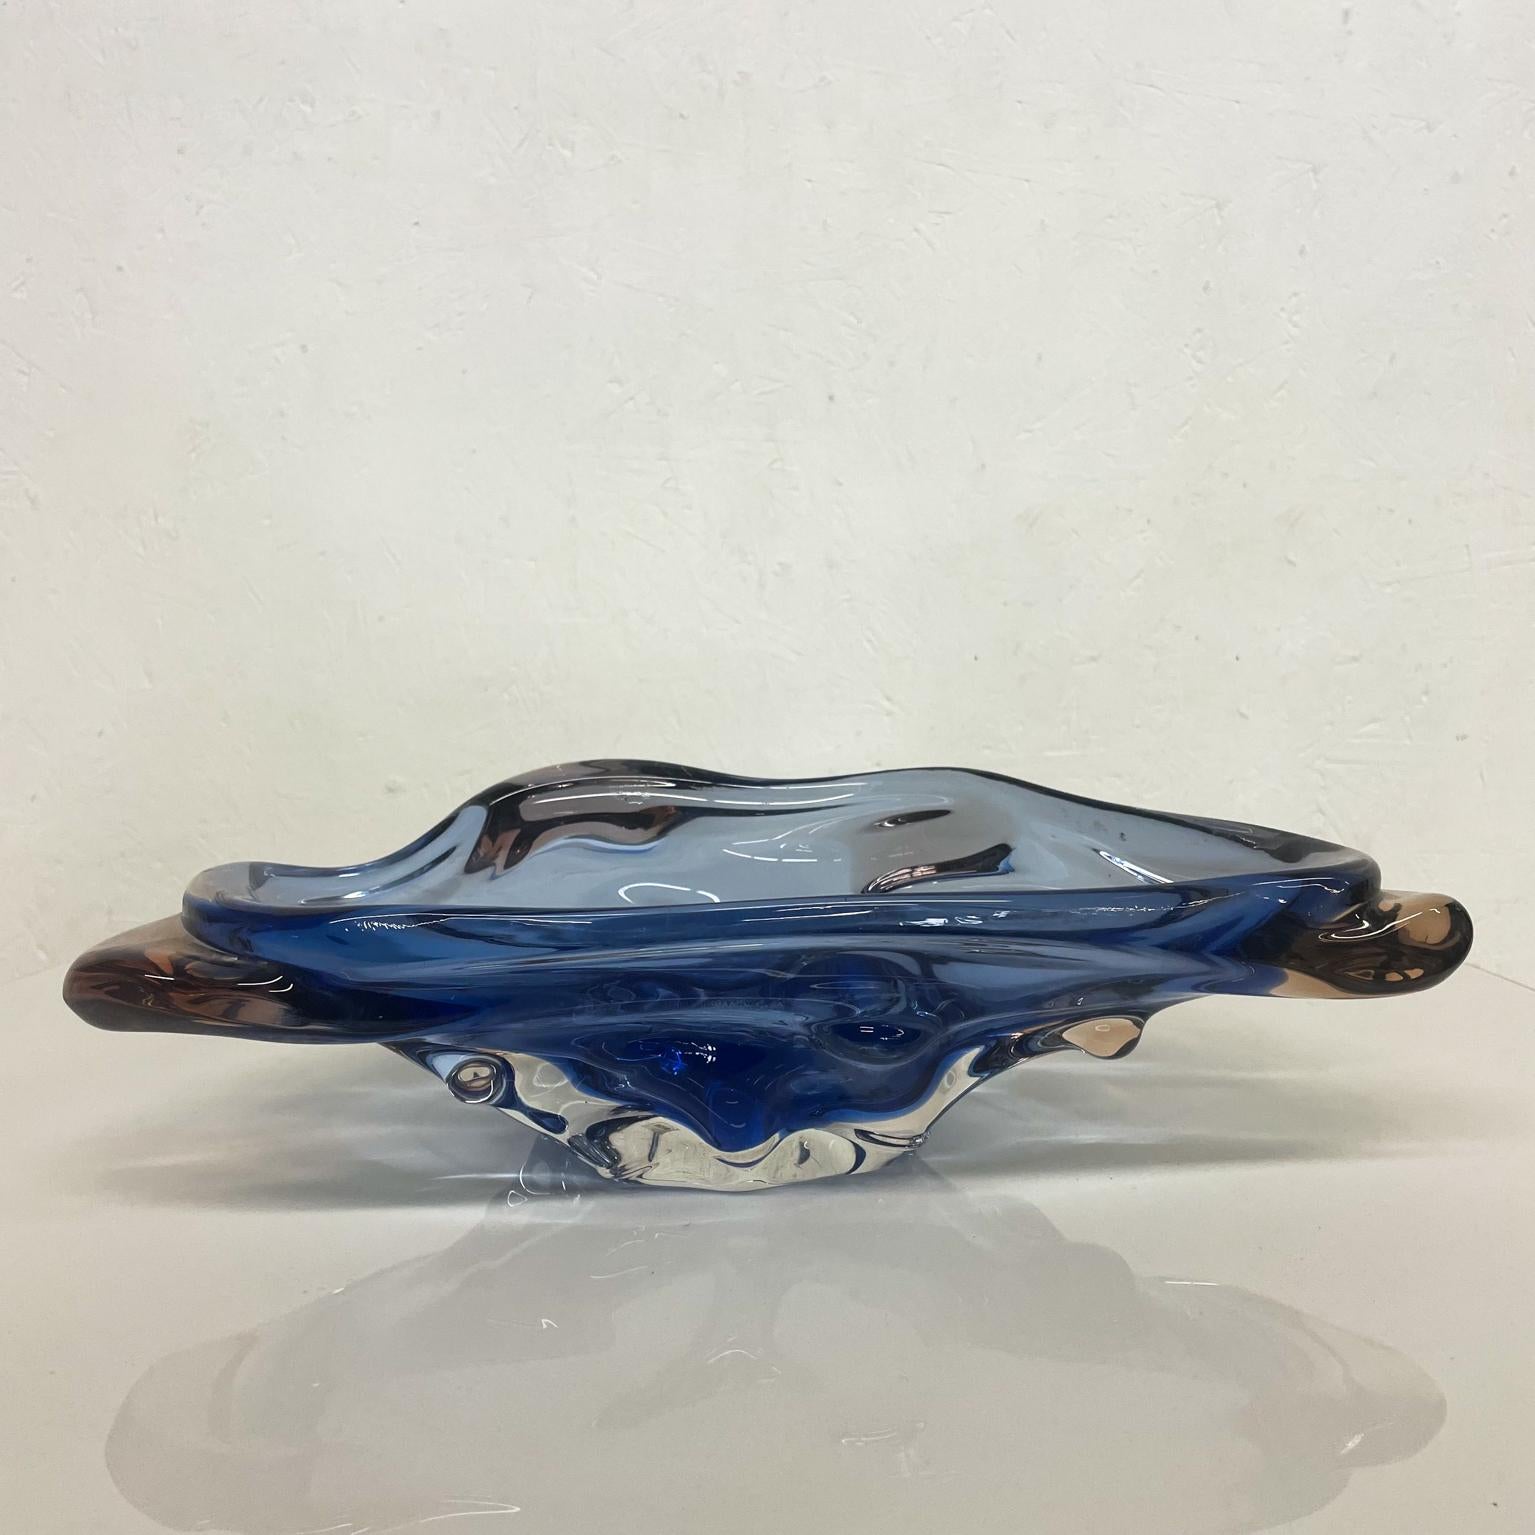 Sculptural dish
Modern expression organic free form Murano blue art glass sculptural dish
Unmarked
14 W x 7.5 D x 3.38 H
Preowned original unrestored vintage condition.
See images provided.

 